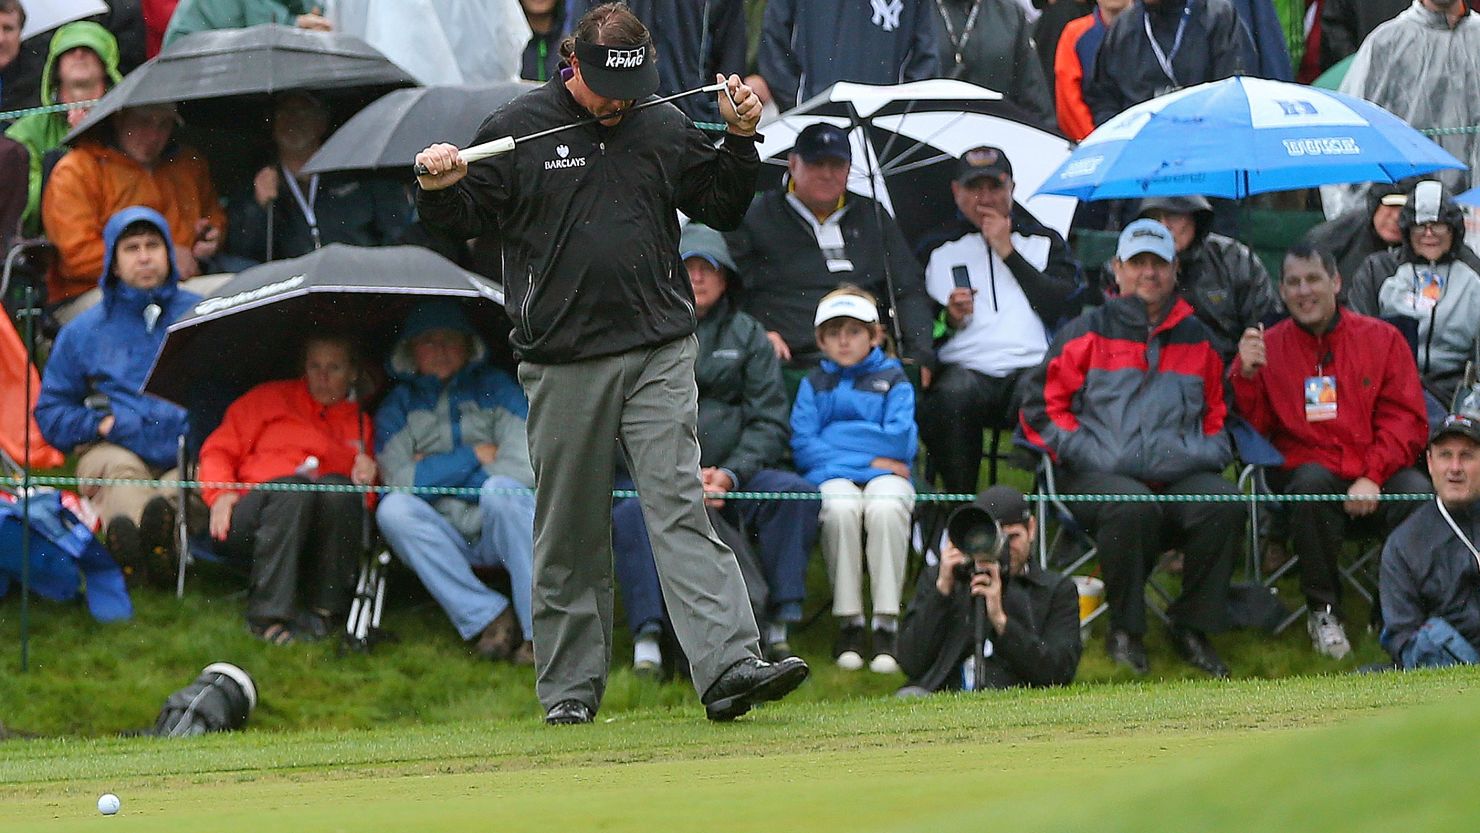 Phil Mickelson reacts to missing a birdie putt on the 18th hole at Quail Hollow, which meant he missed a playoff .